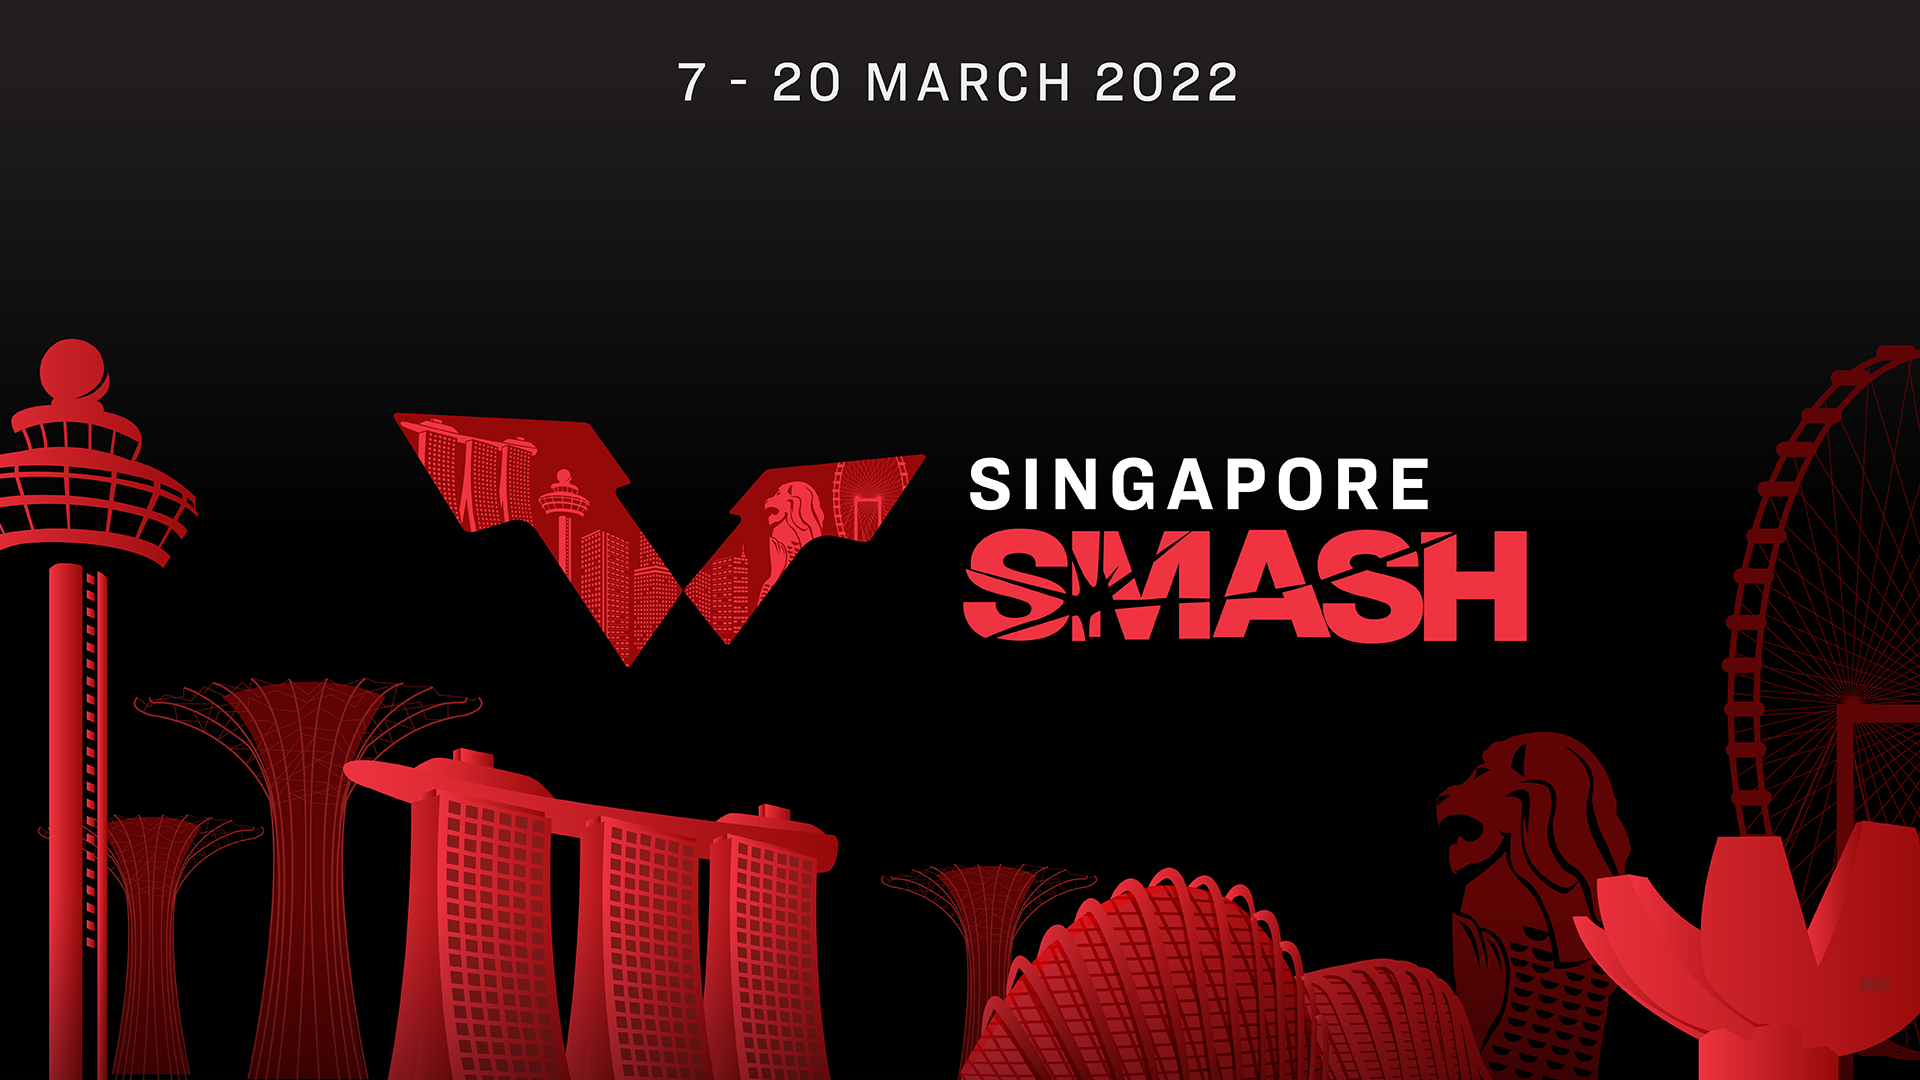 Singapore to stage inaugural WTT Grand Smash with record prize money on offer